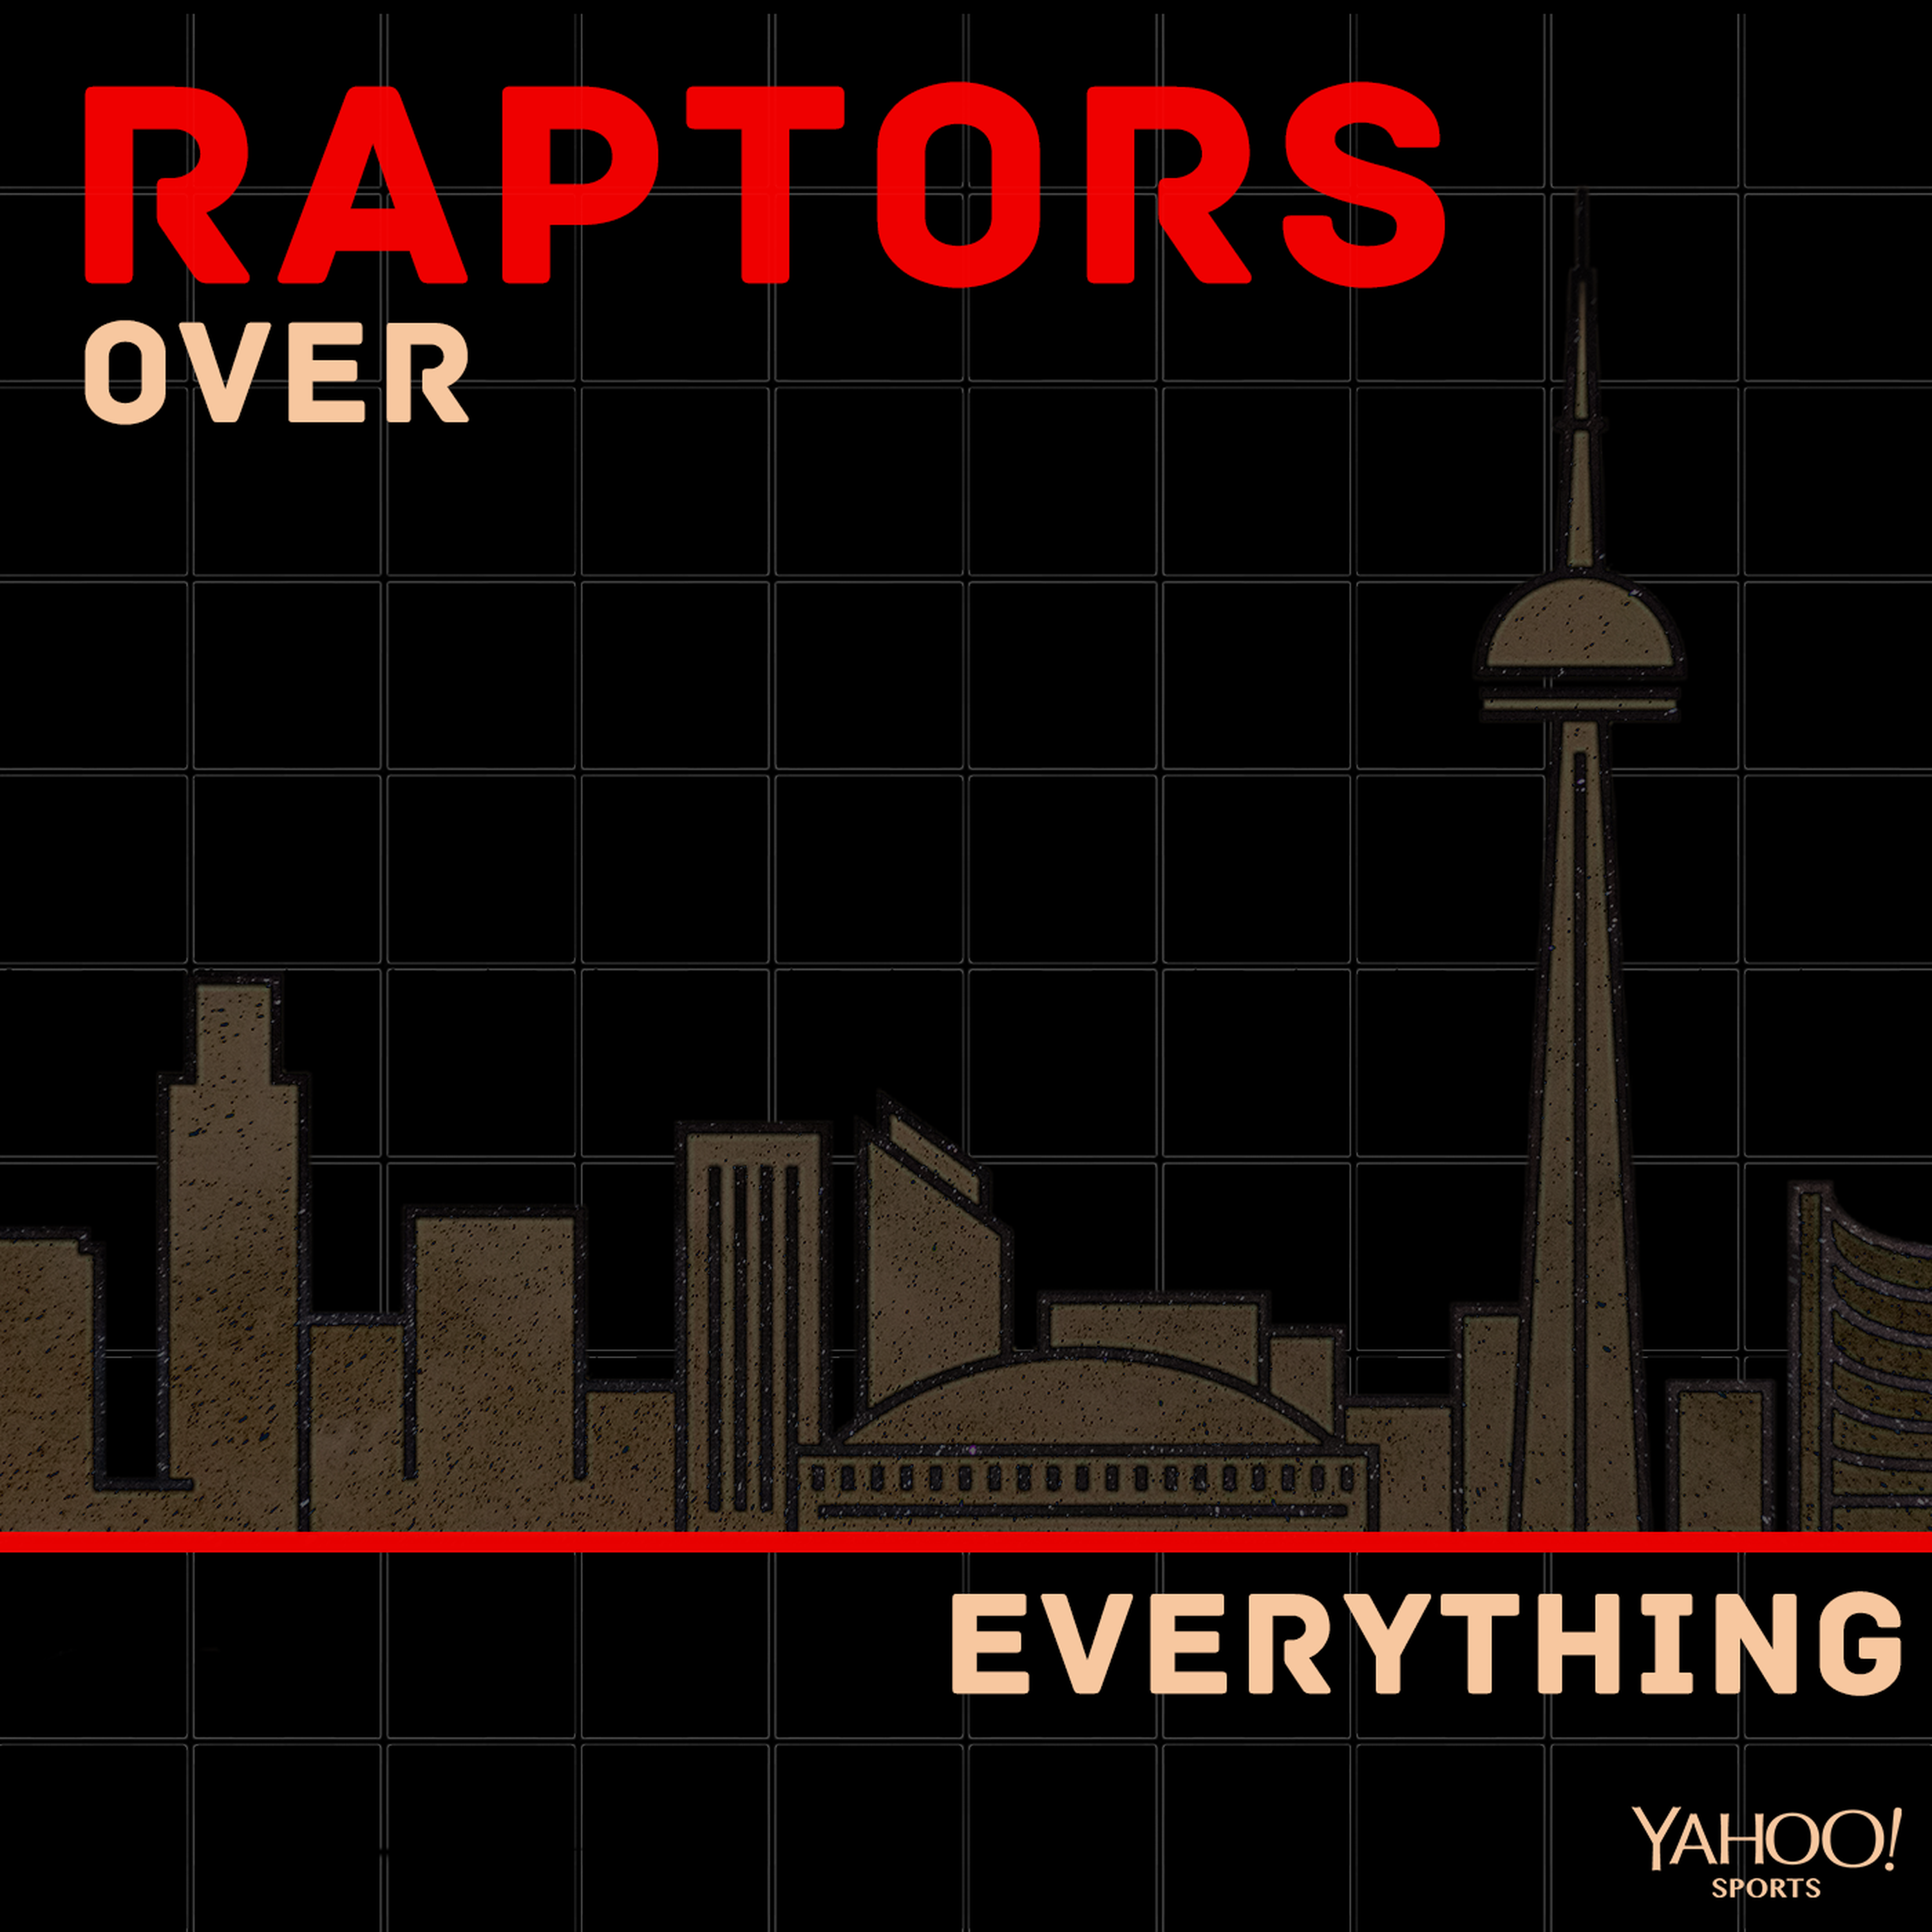 Assessing Raptors-Warriors After Game 1 with Chris Haynes